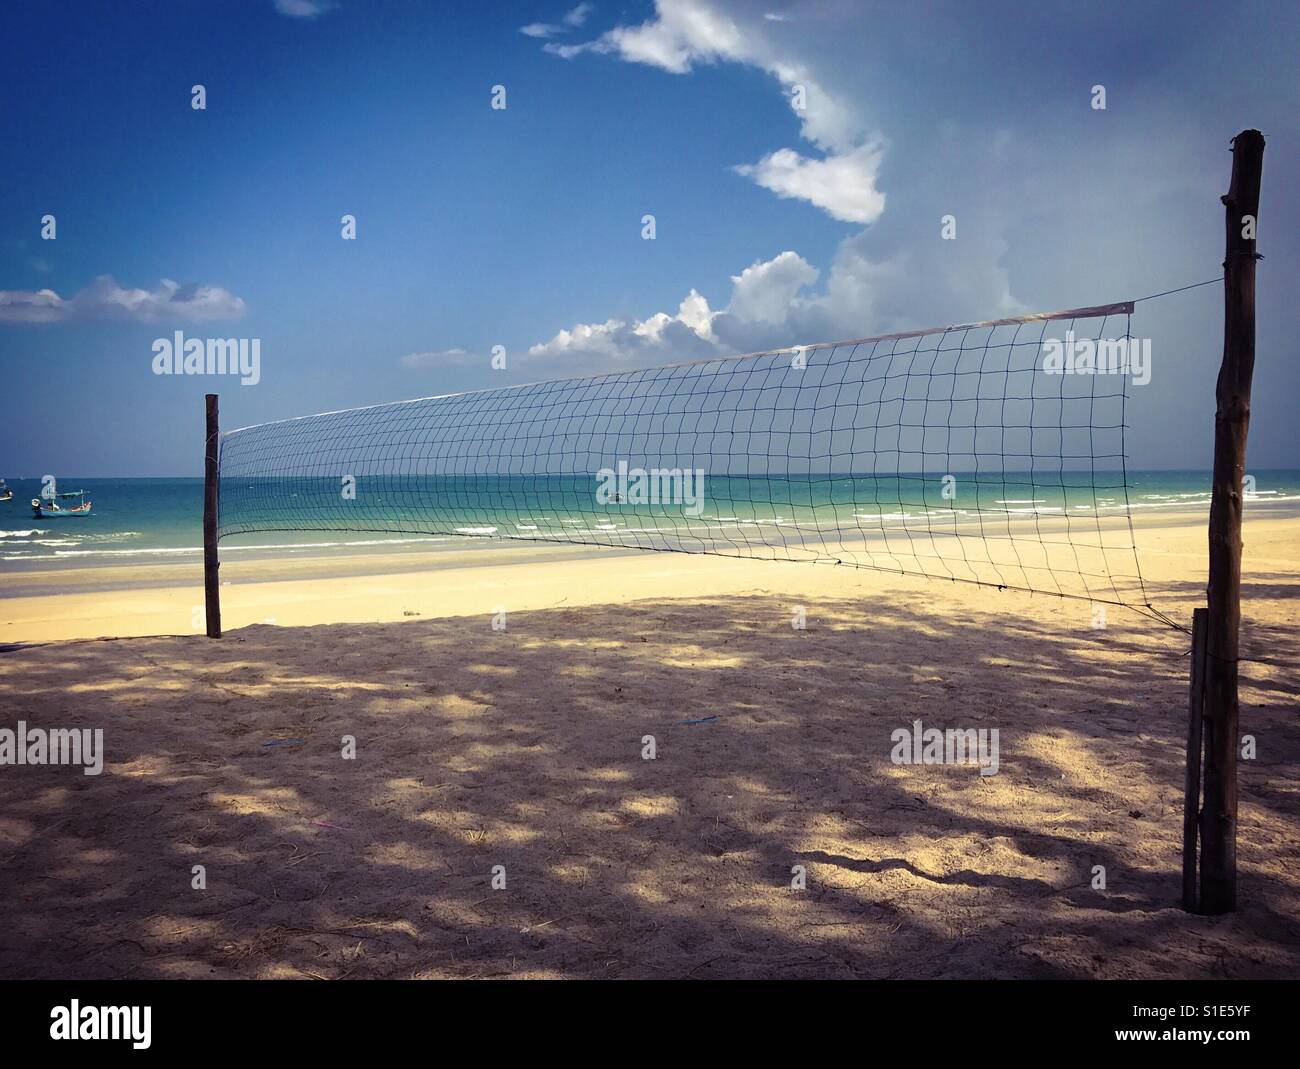 Beach volleyball net by the sea Stock Photo